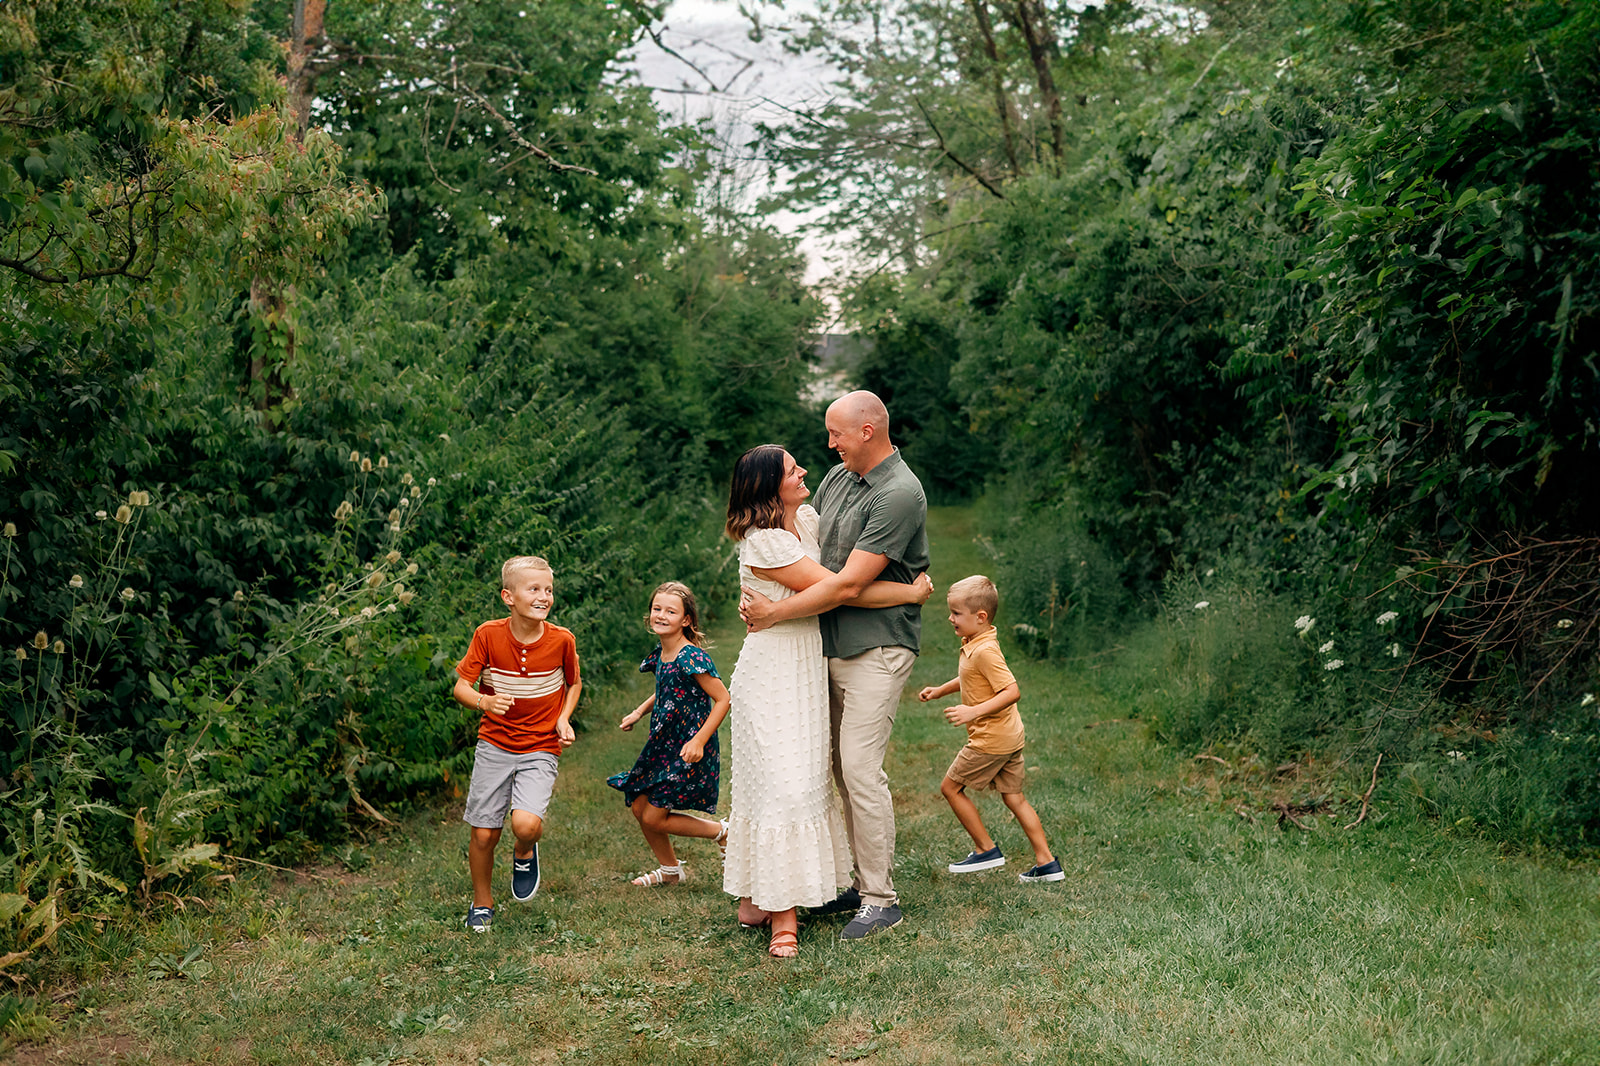 The image shows a candid moment of a family outdoors. In the center, a couple is embracing, the woman leaning into the man as they both smile softly. To their left, two children, a boy in an orange shirt and a girl in a navy floral dress, are laughing and running towards the camera. On the right, another boy in a tan shirt smiles as he looks ahead, running slightly ahead of the rest. The background is lush with greenery, indicating a natural, possibly wooded area. The scene is lively and portrays a sense of movement and familial joy.